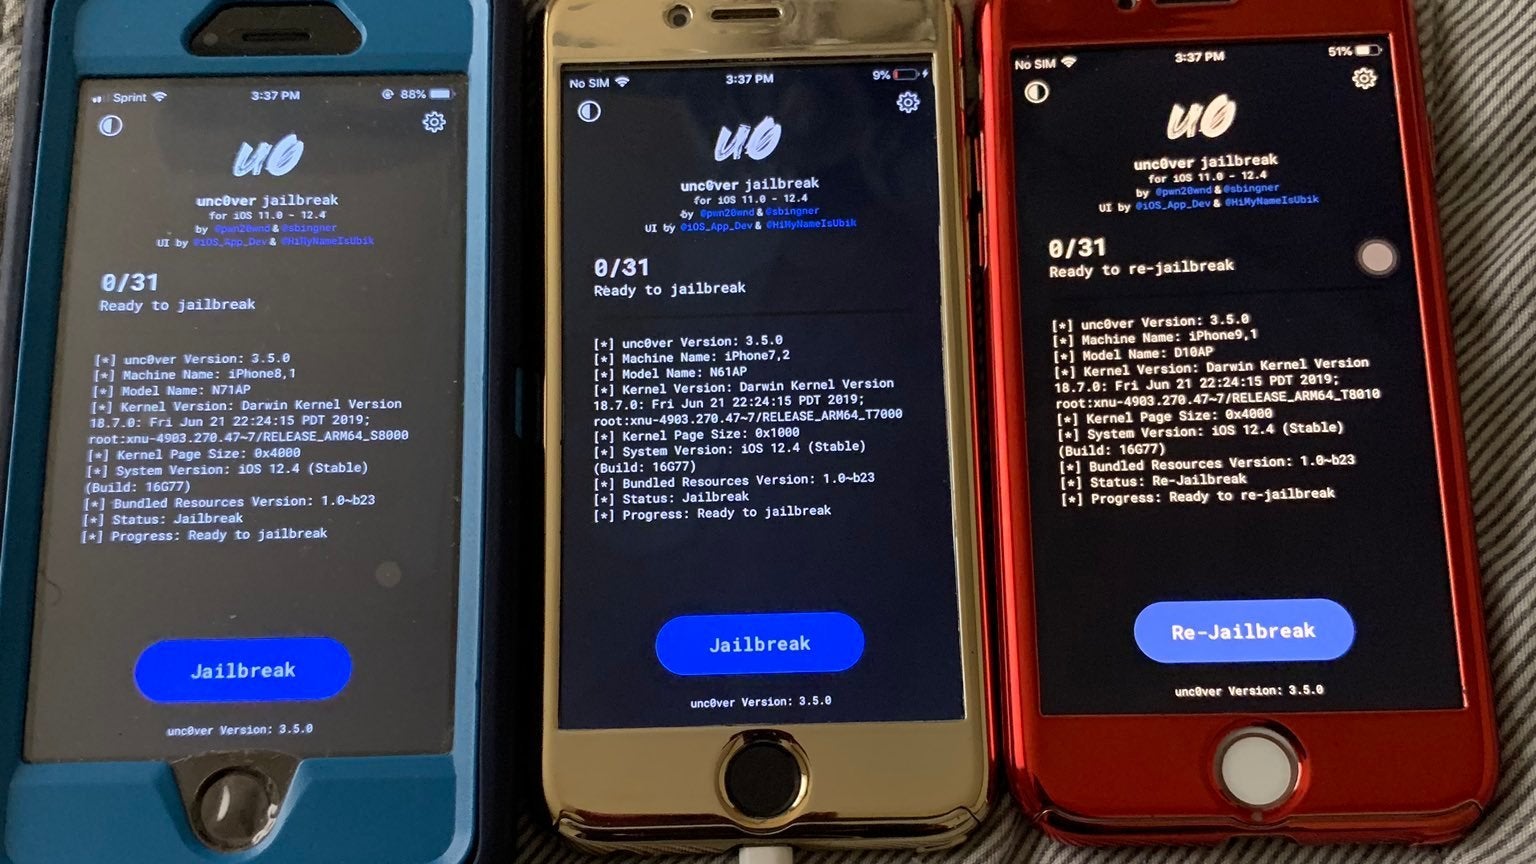 How To Jailbreak Your iOS 12.4 iPhone Or iPad